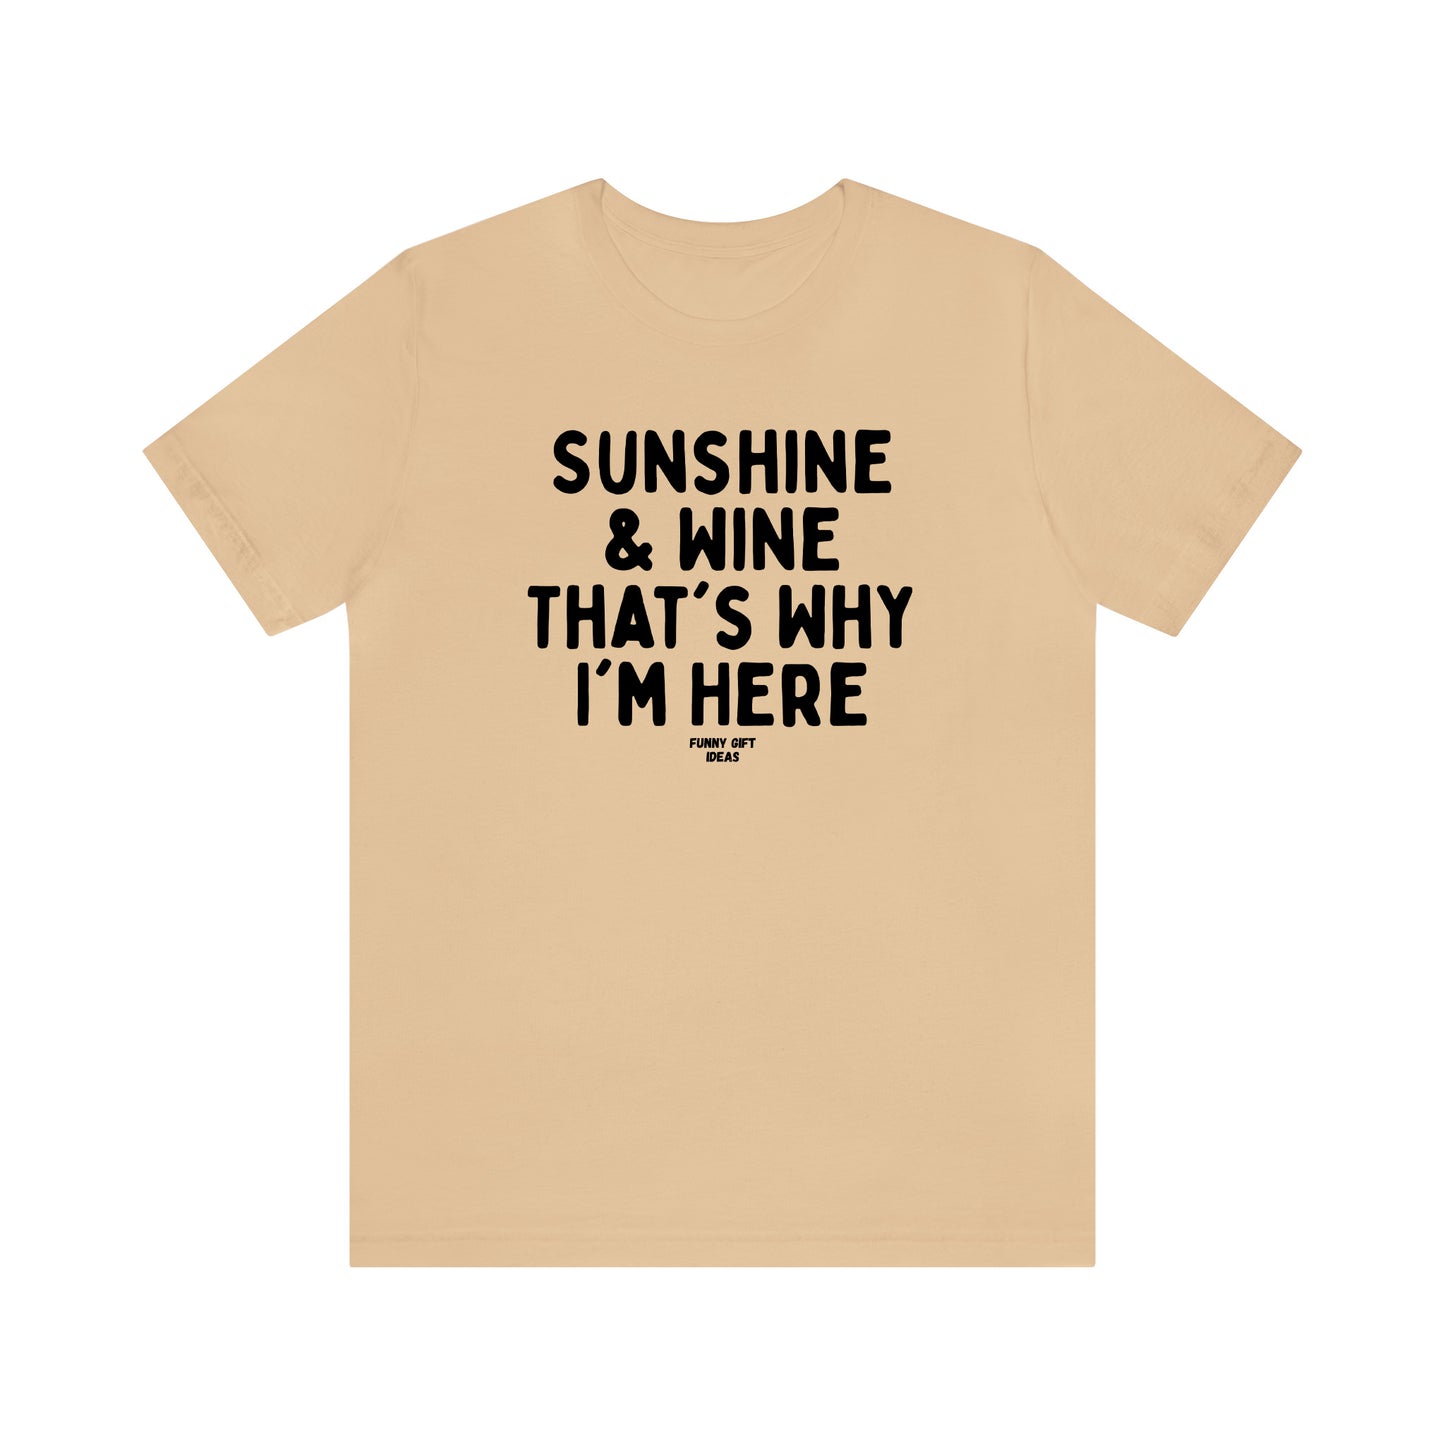 Funny Shirts for Women - Sunshine & Wine That's Why I'm Here - Women's T Shirts